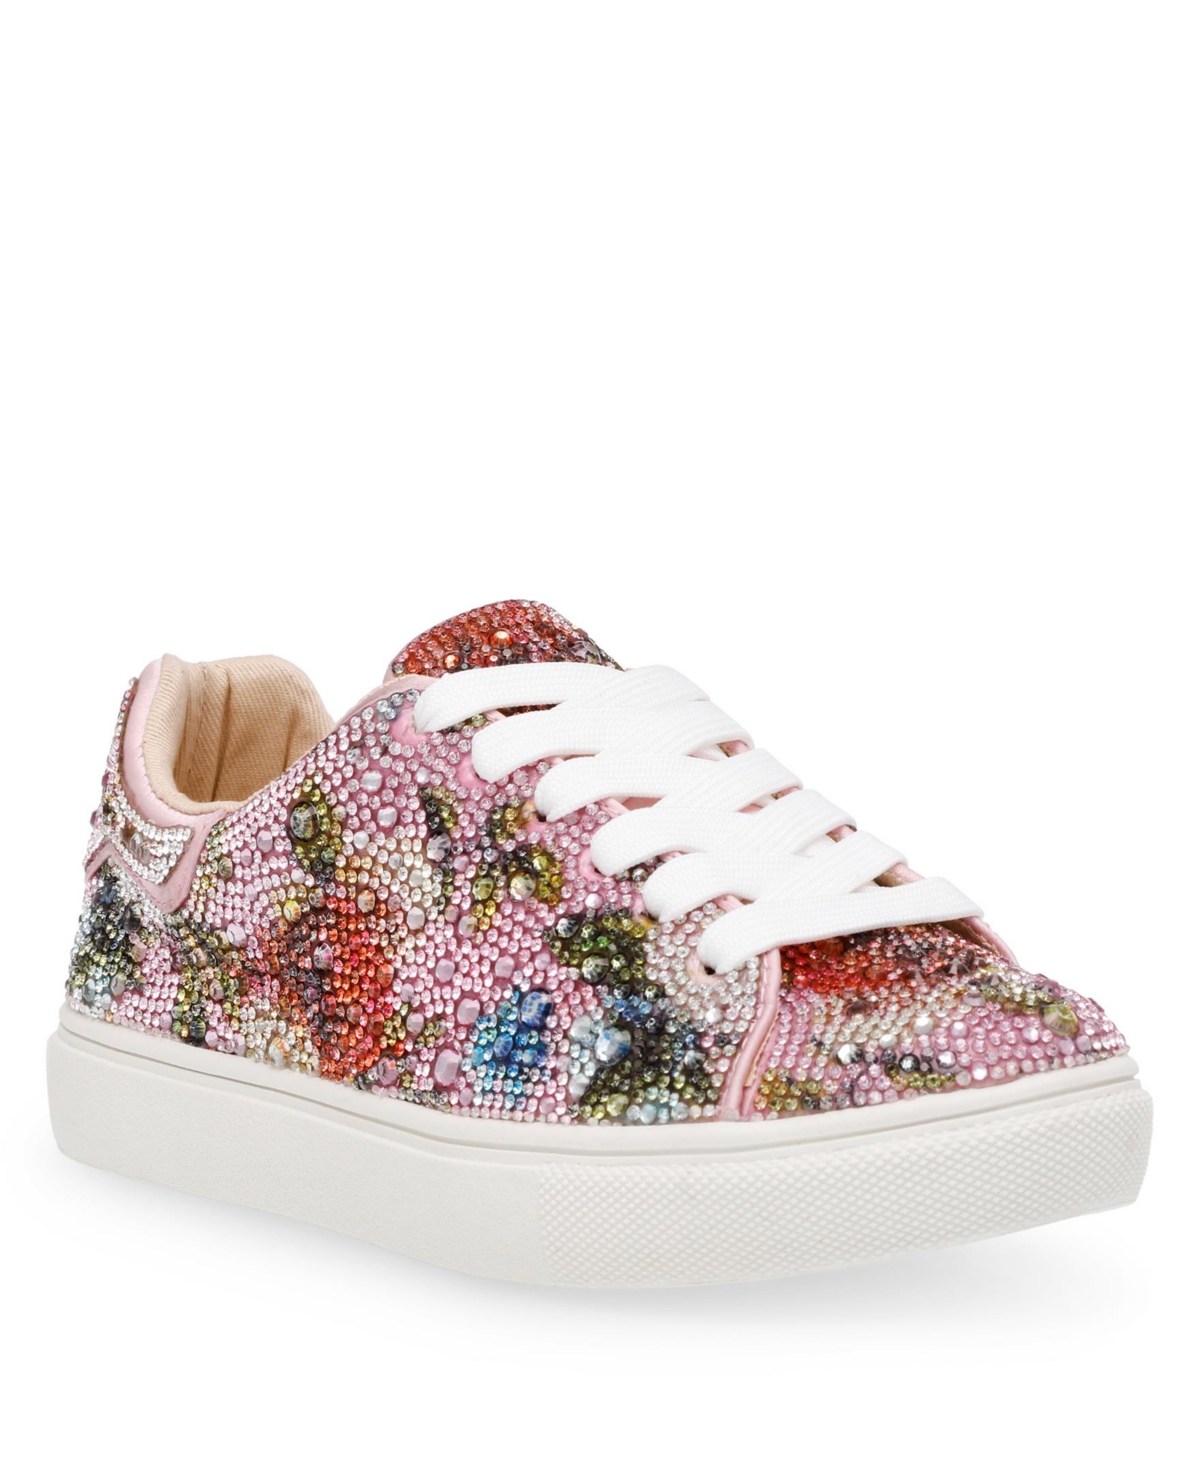 Betsey Johnson Kids' Big Girls Sidny Rhinestone Lace-up Sneakers In Floral Multi